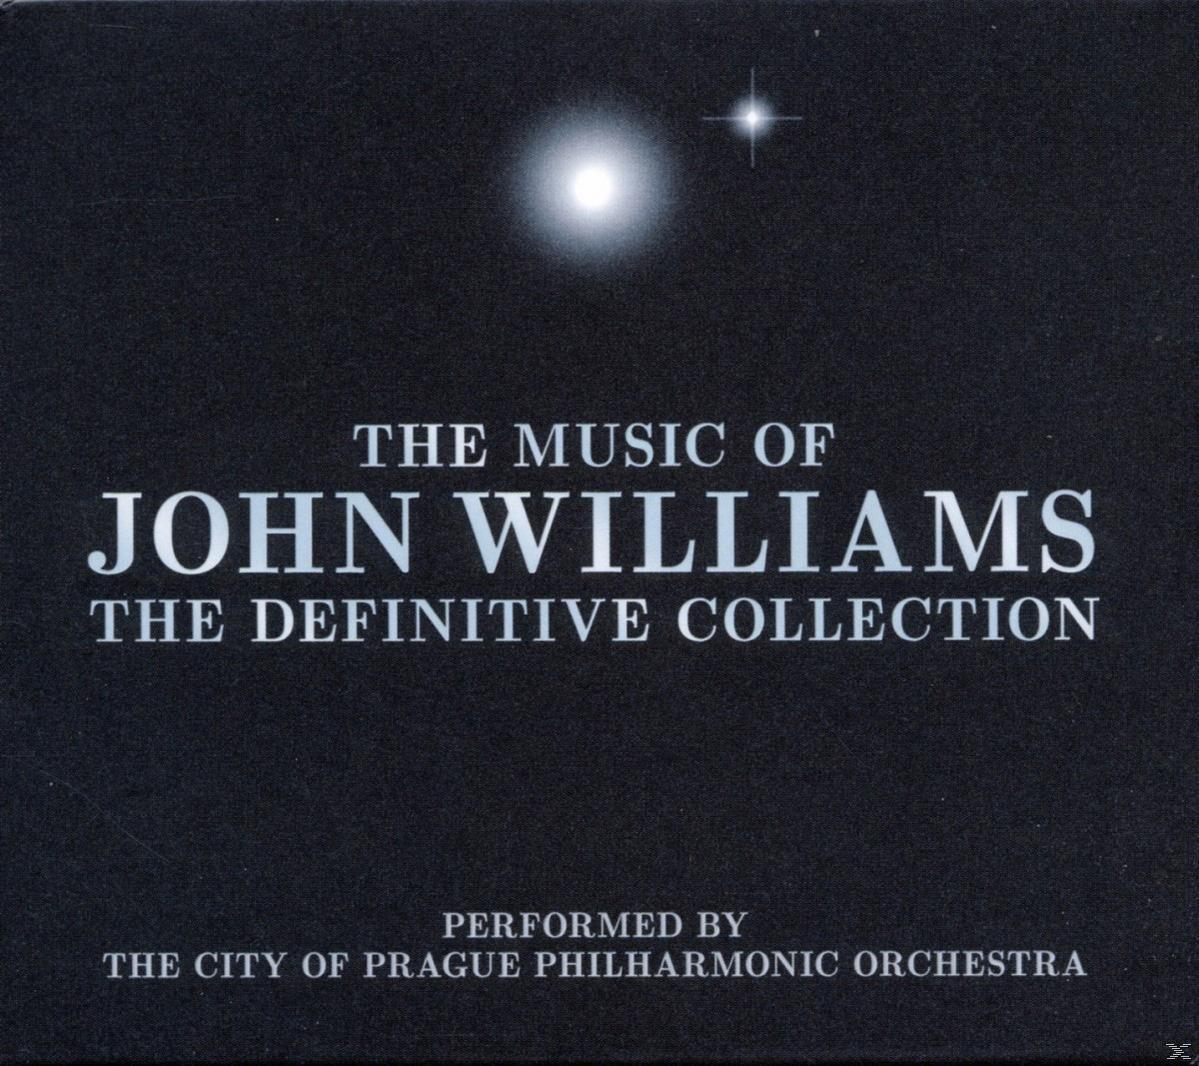 John (CD) - Of - The N.Y. Definitive Music - The Orchestra, Williams Jazz London Prague Music Philharmonic City Of The Works, Orchestra Collection